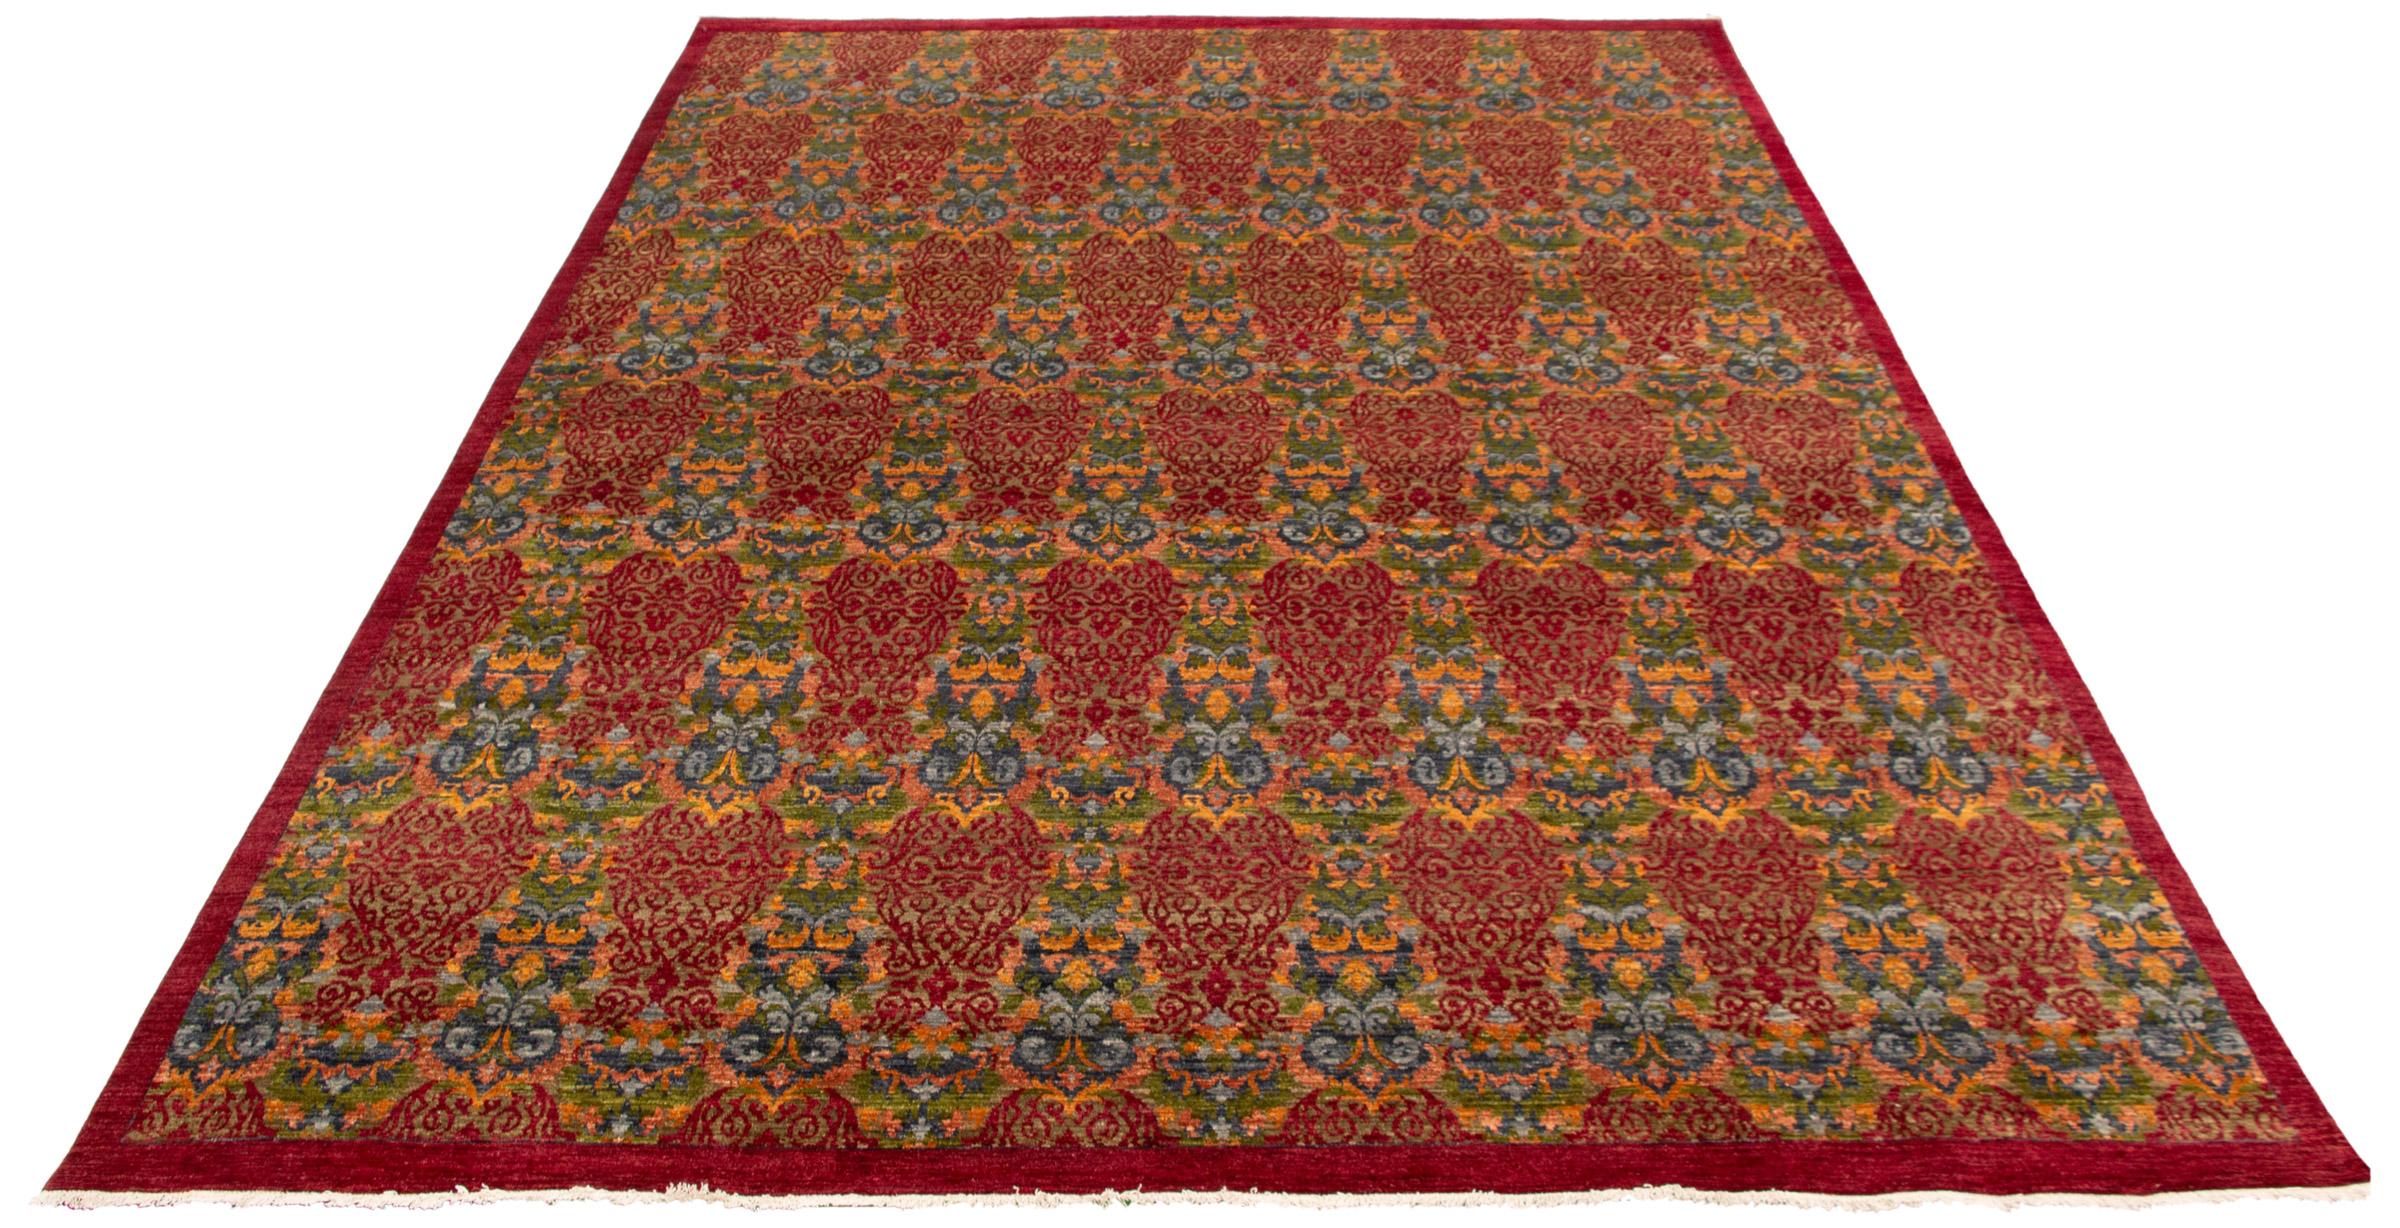 Art Nouveau Hand-Knotted Wool, Red Lahore Carpet, 10’ x 14’ For Sale